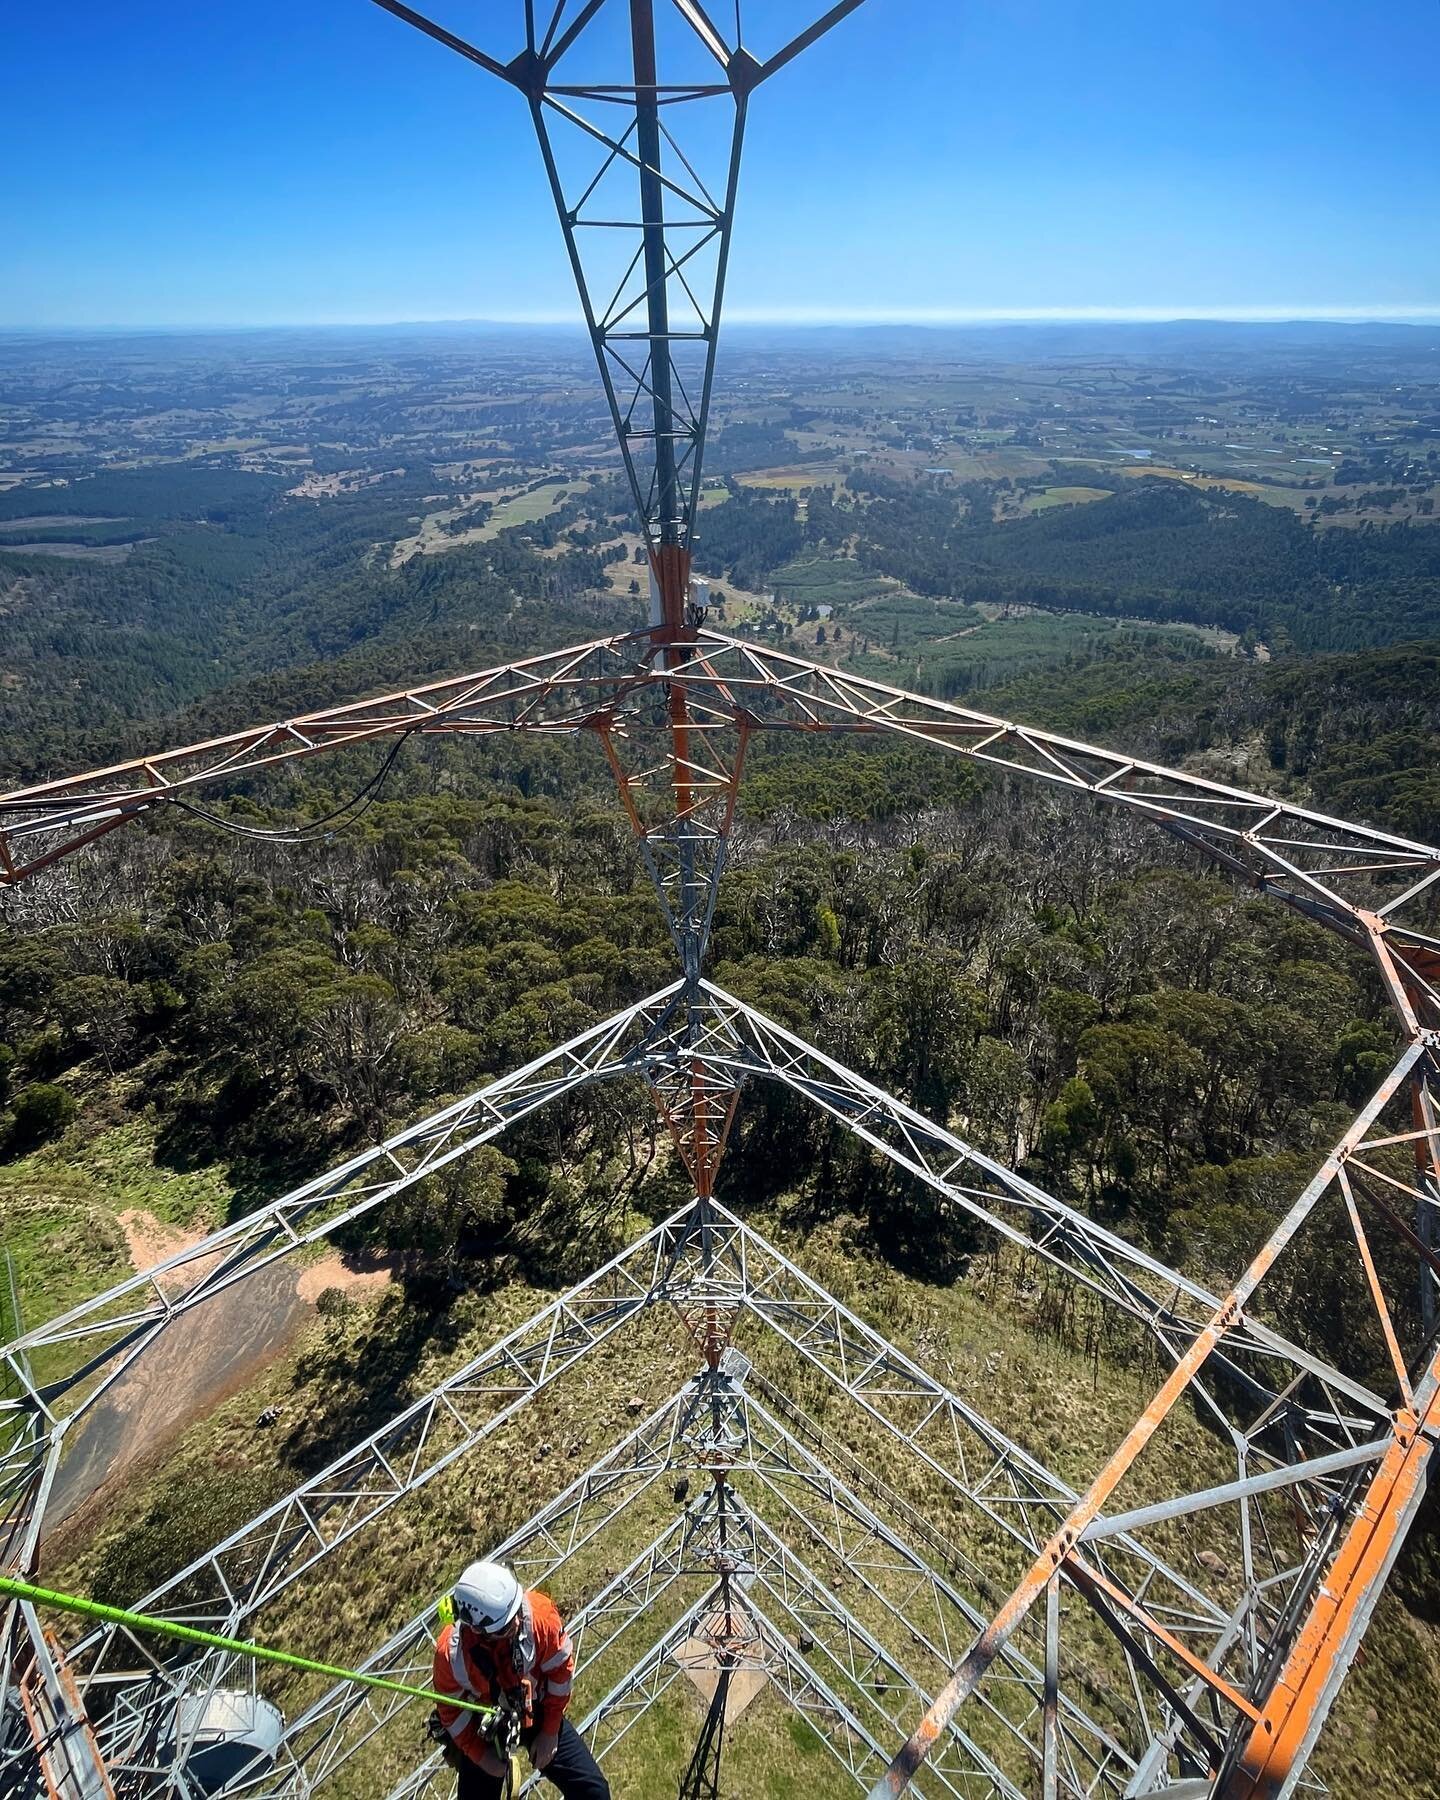 Have you ever wondered what keeps the marvel that is the wireless telecommunications network running? We have the answer: Coffee, Tim Tams and lots of Powerade. Absolutely stunning views for some of our telecommunications team working in regional NSW